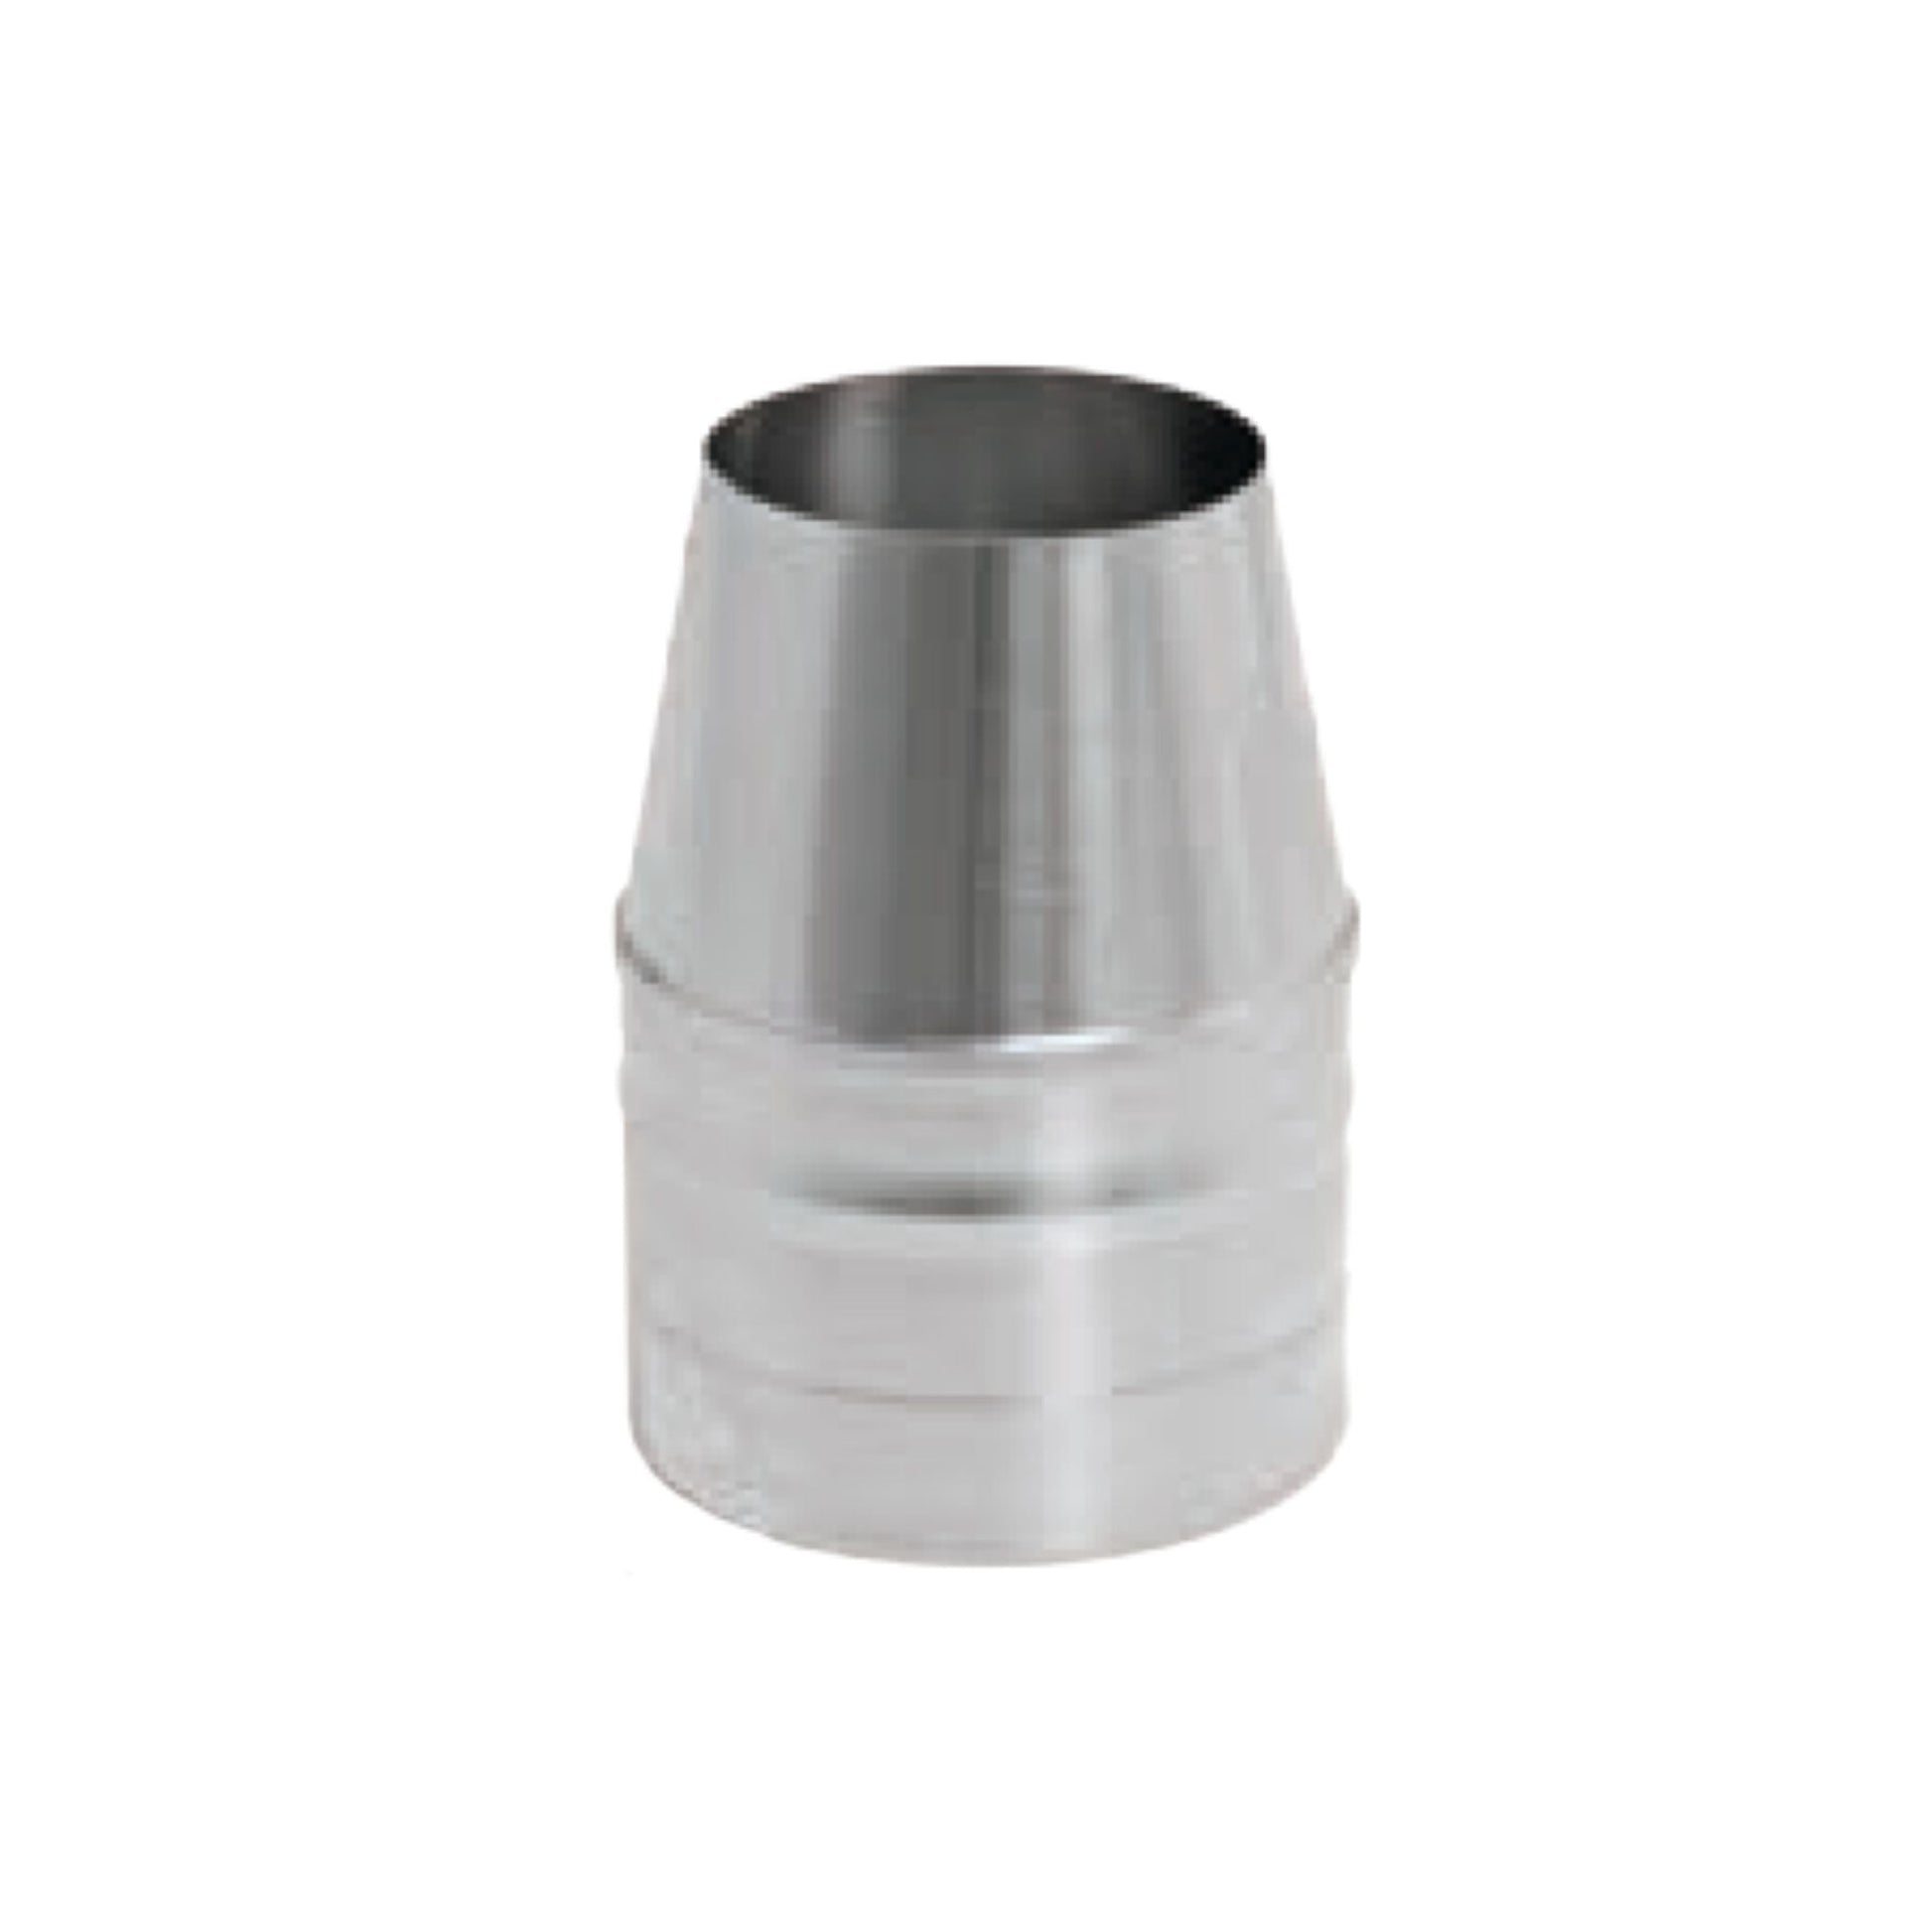 DuraVent FasNSeal 14" x 13" 29-4C Stainless Steel Termination Cone